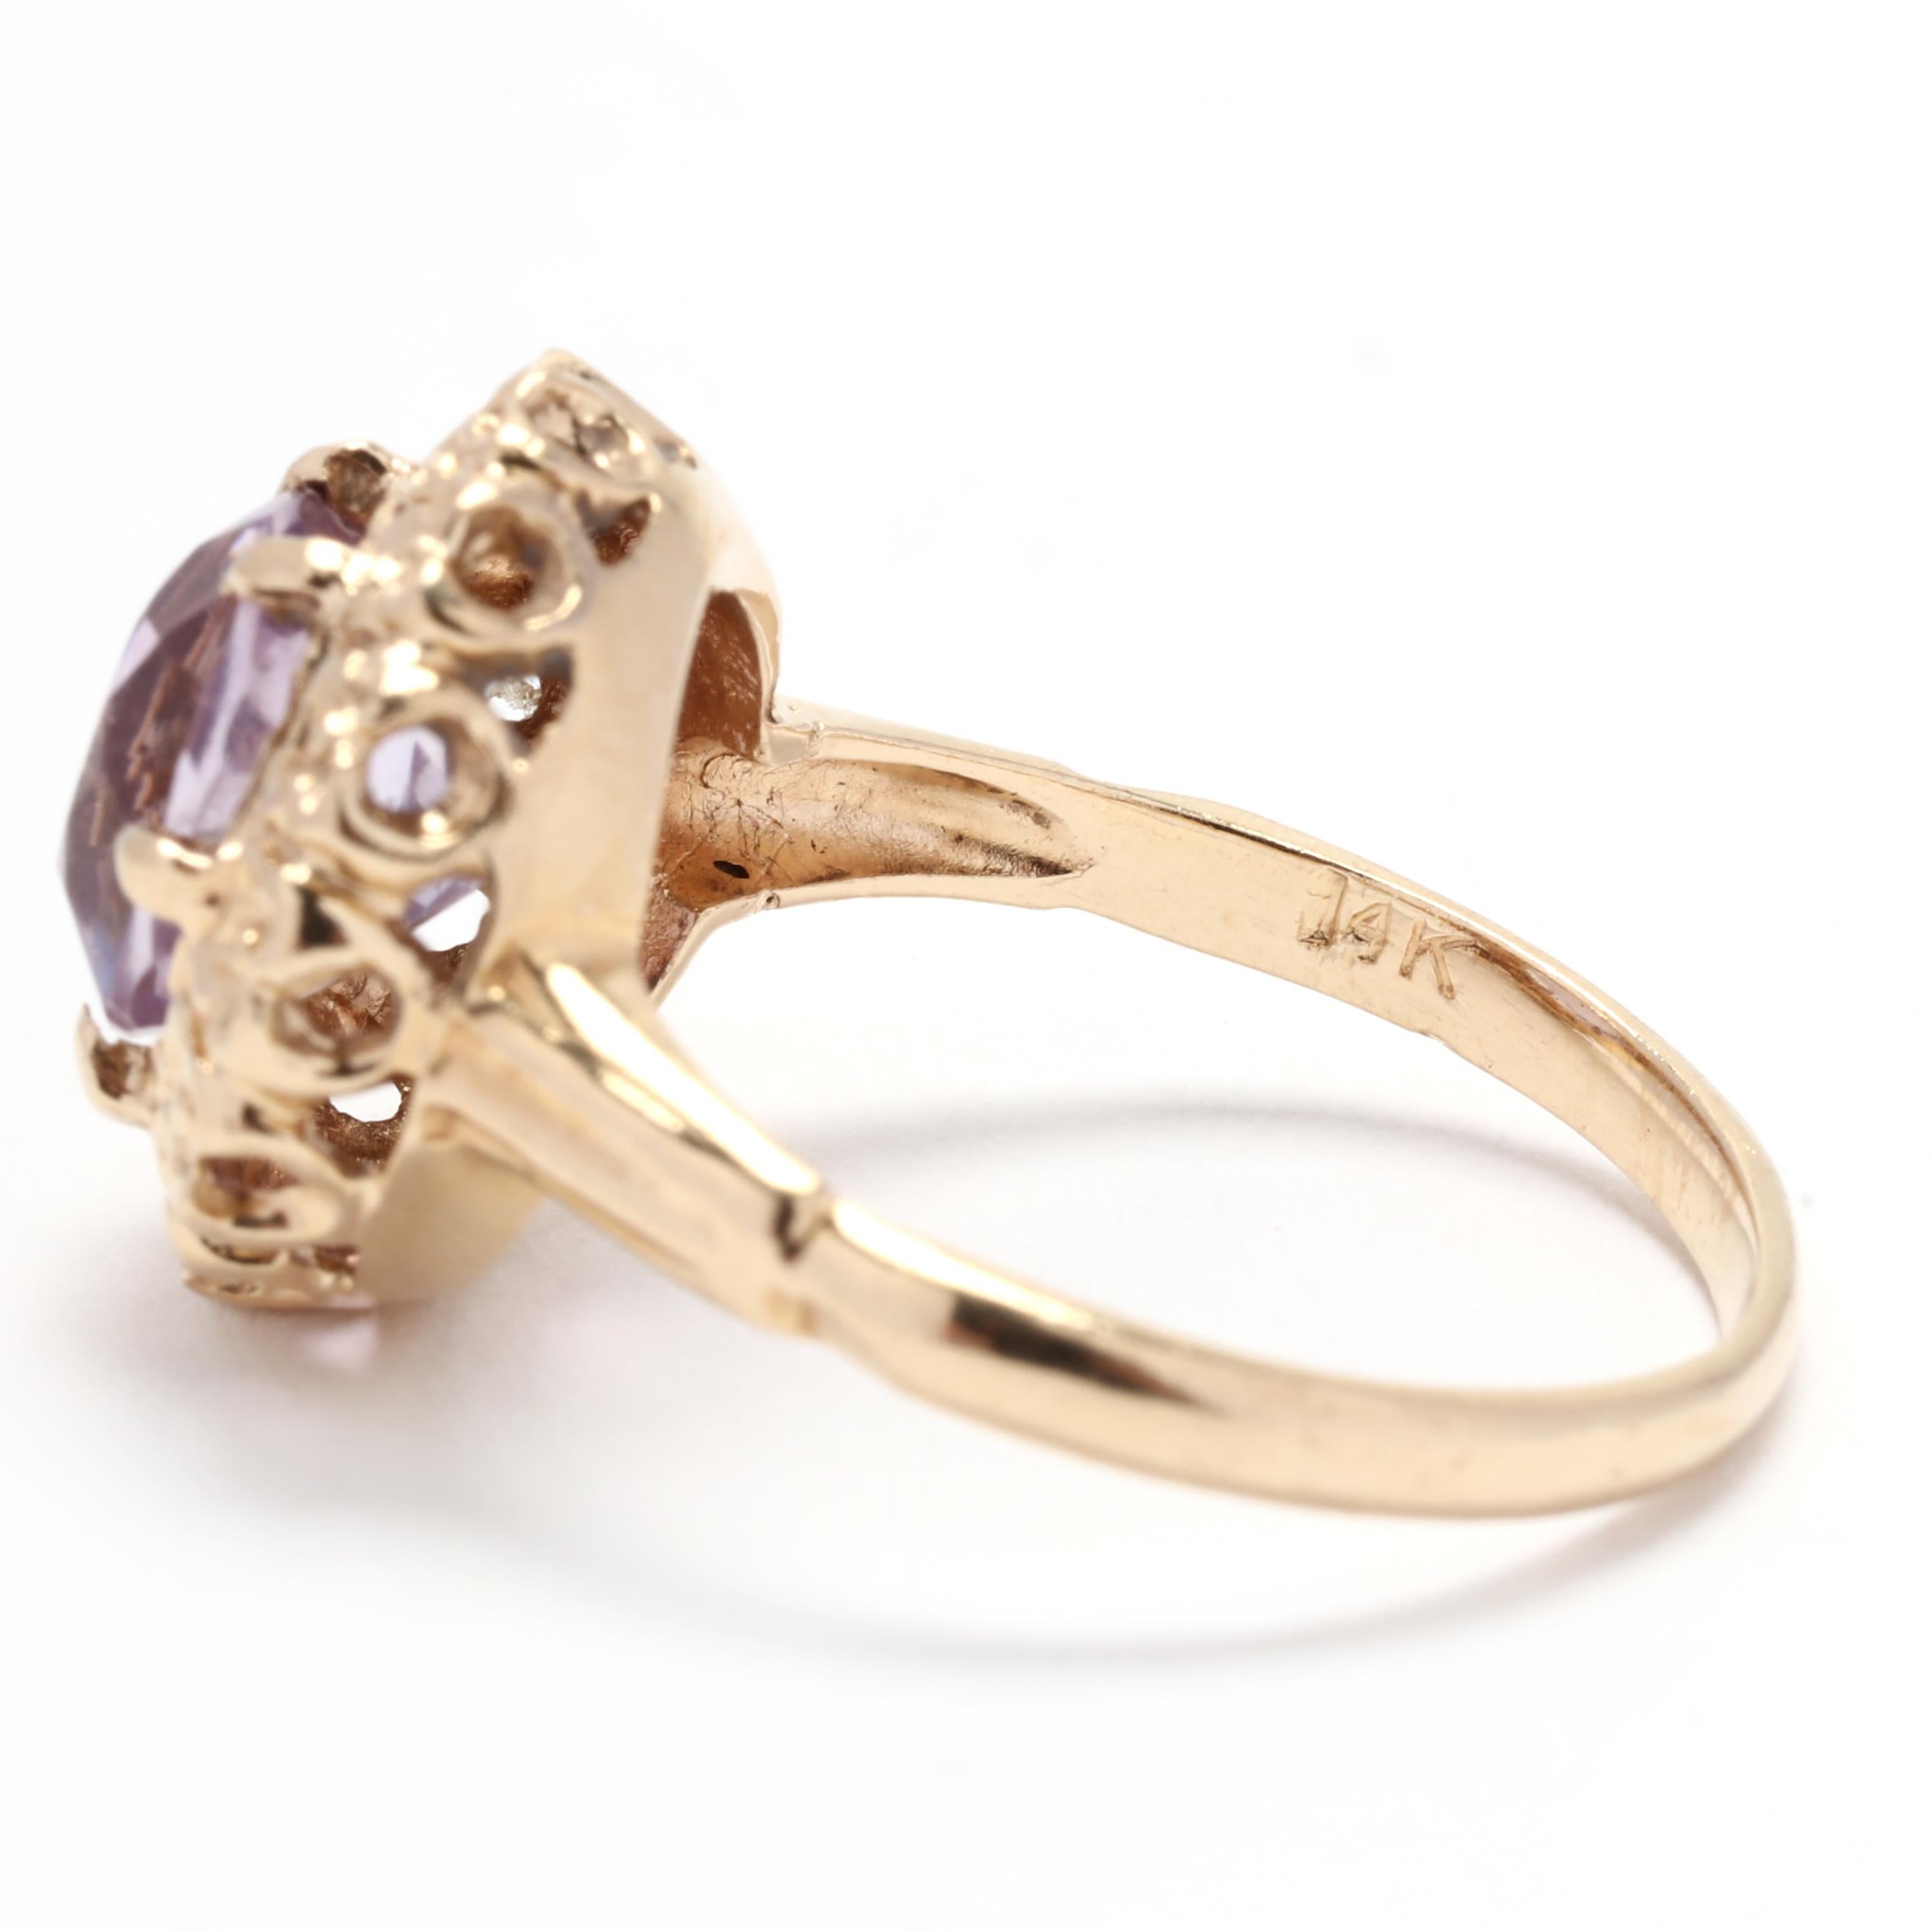 Women's or Men's 1.50ct Amethyst Flower Halo Ring, 14K Yellow Gold, Ring Size 5.5, Vintage Ring